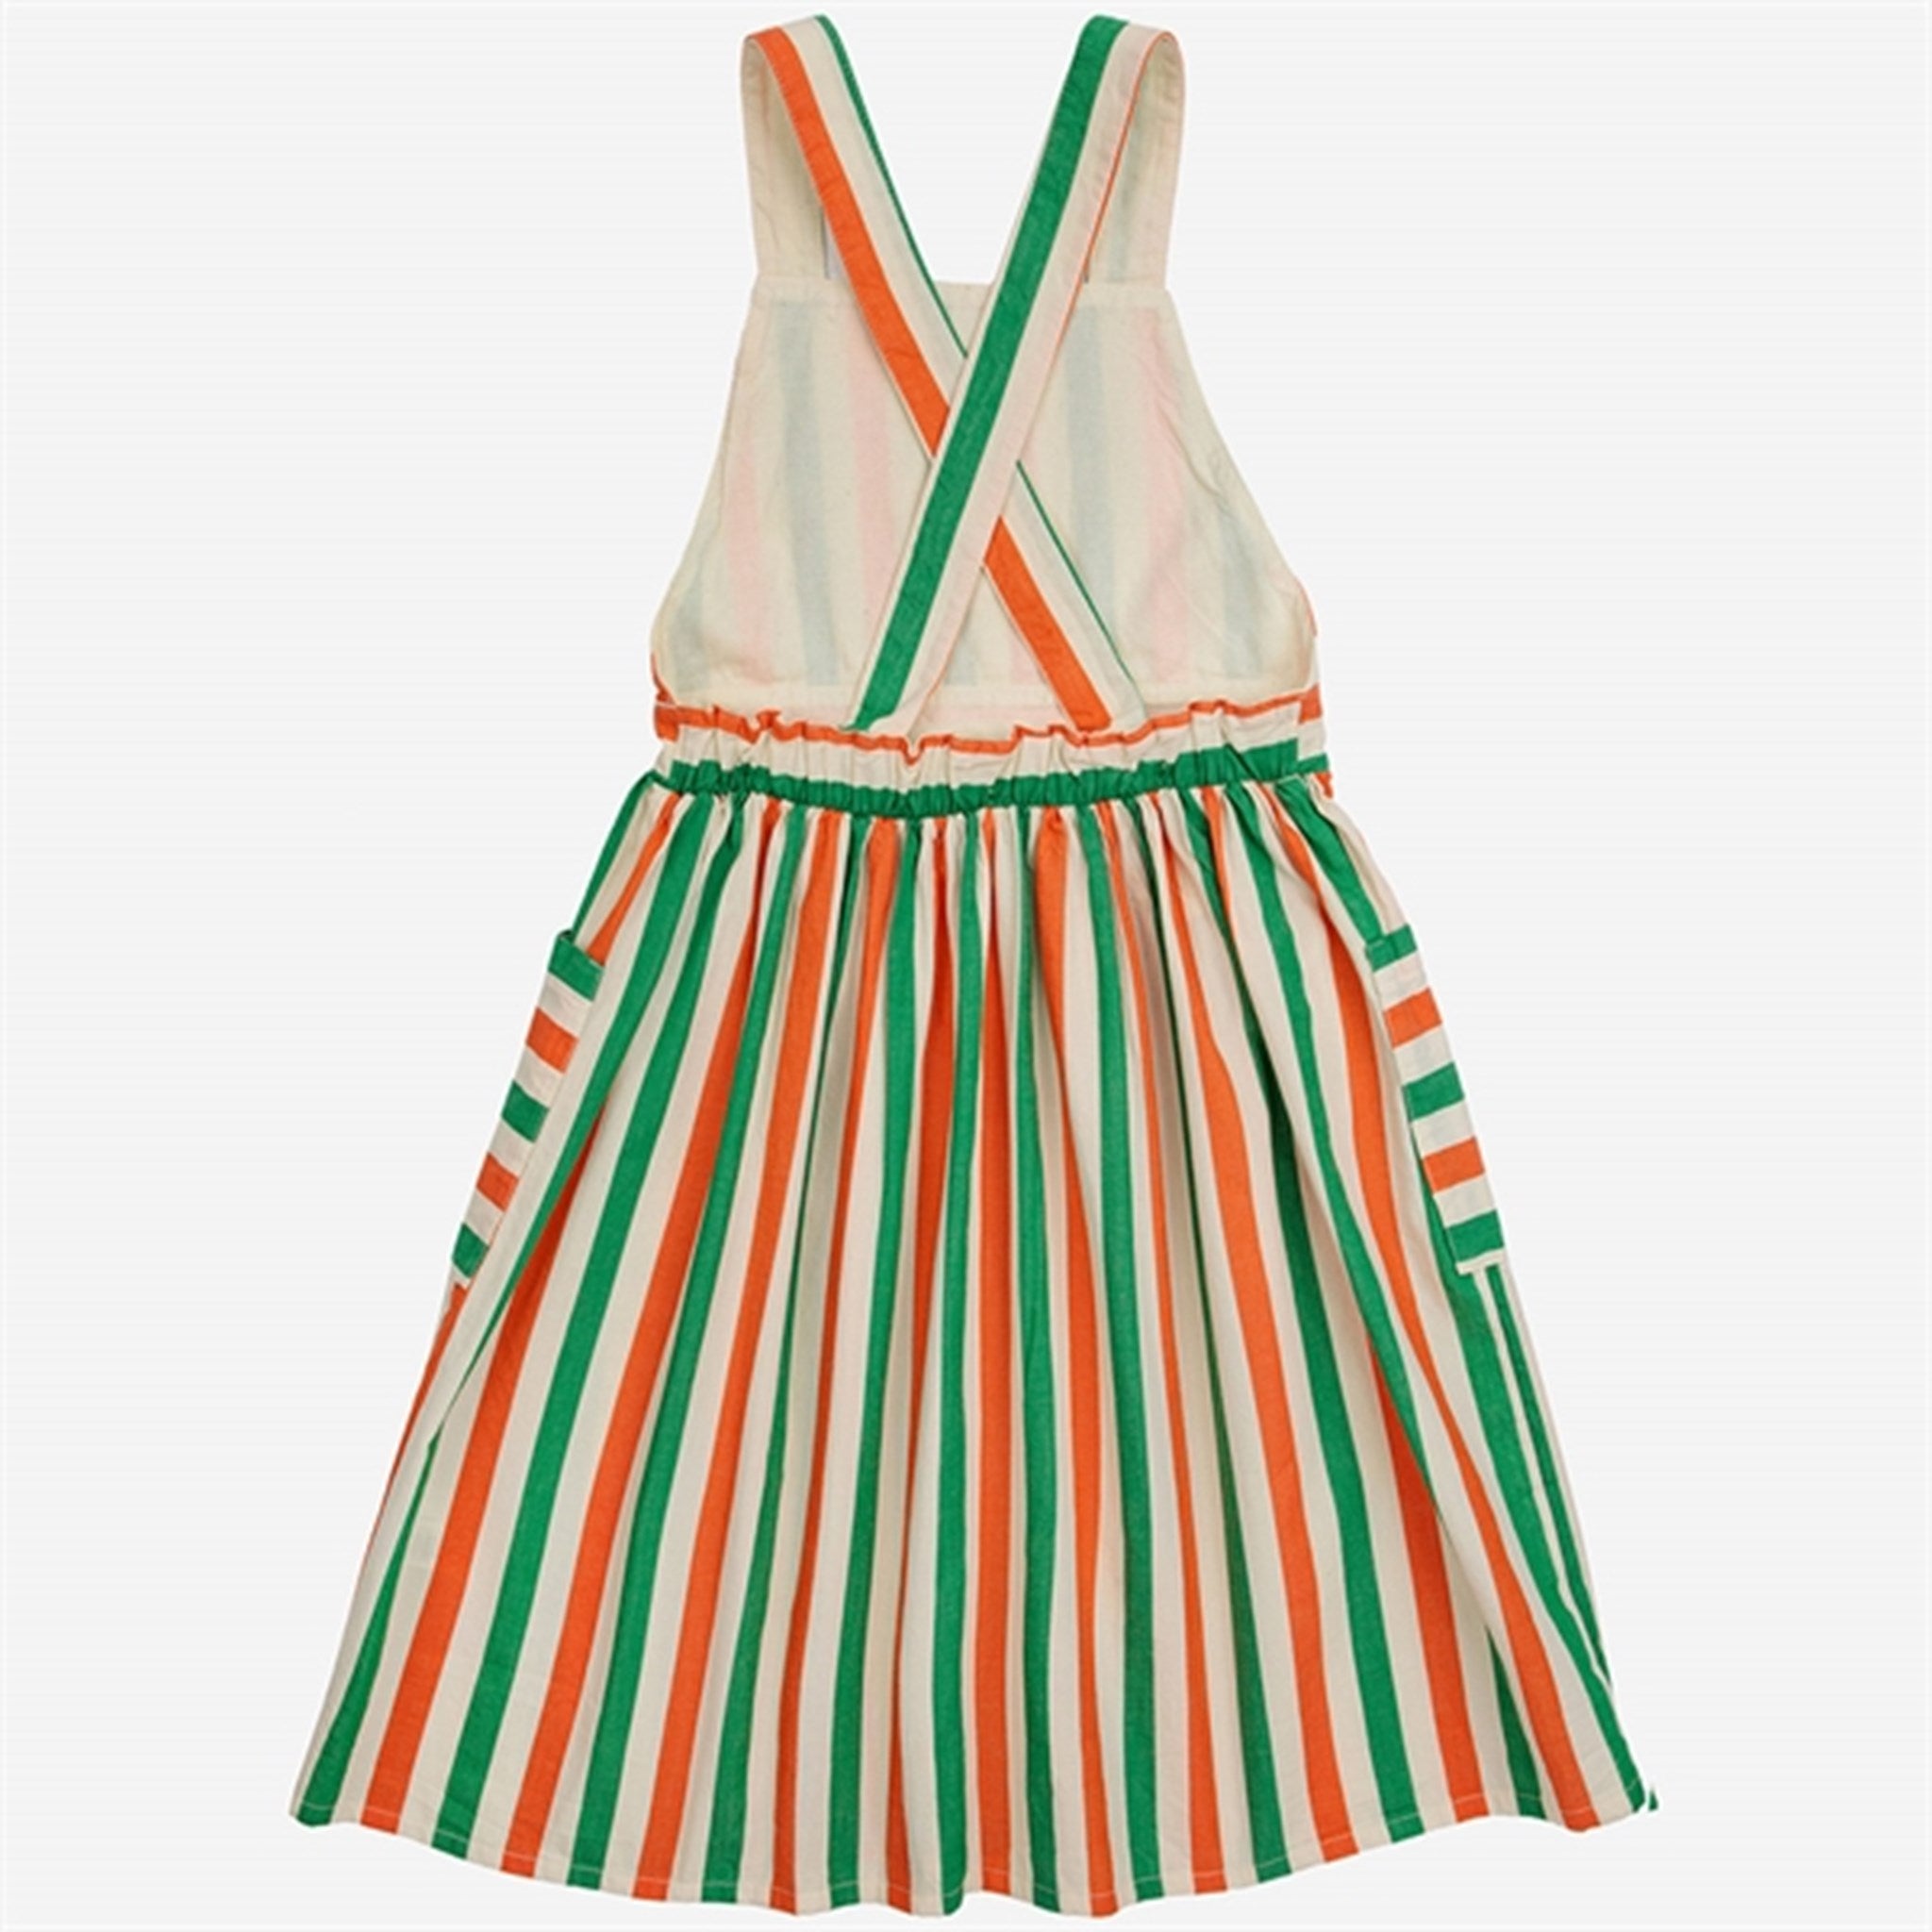 Bobo Choses Vertical Stripes Woven Dress Knee Lenght Offwhite 8